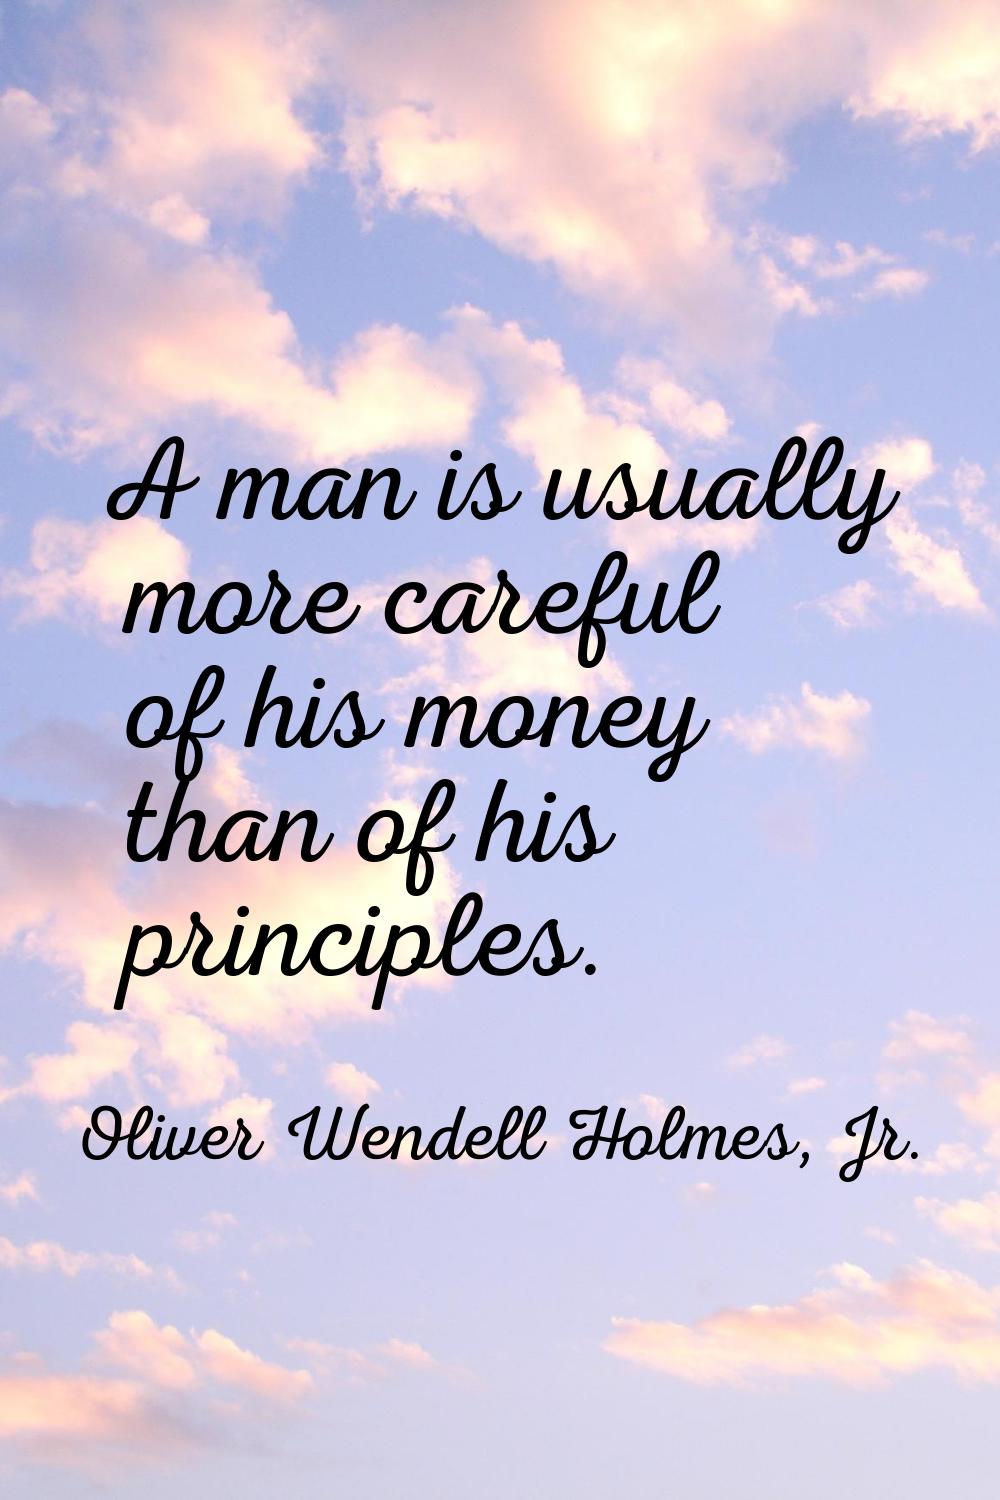 A man is usually more careful of his money than of his principles.